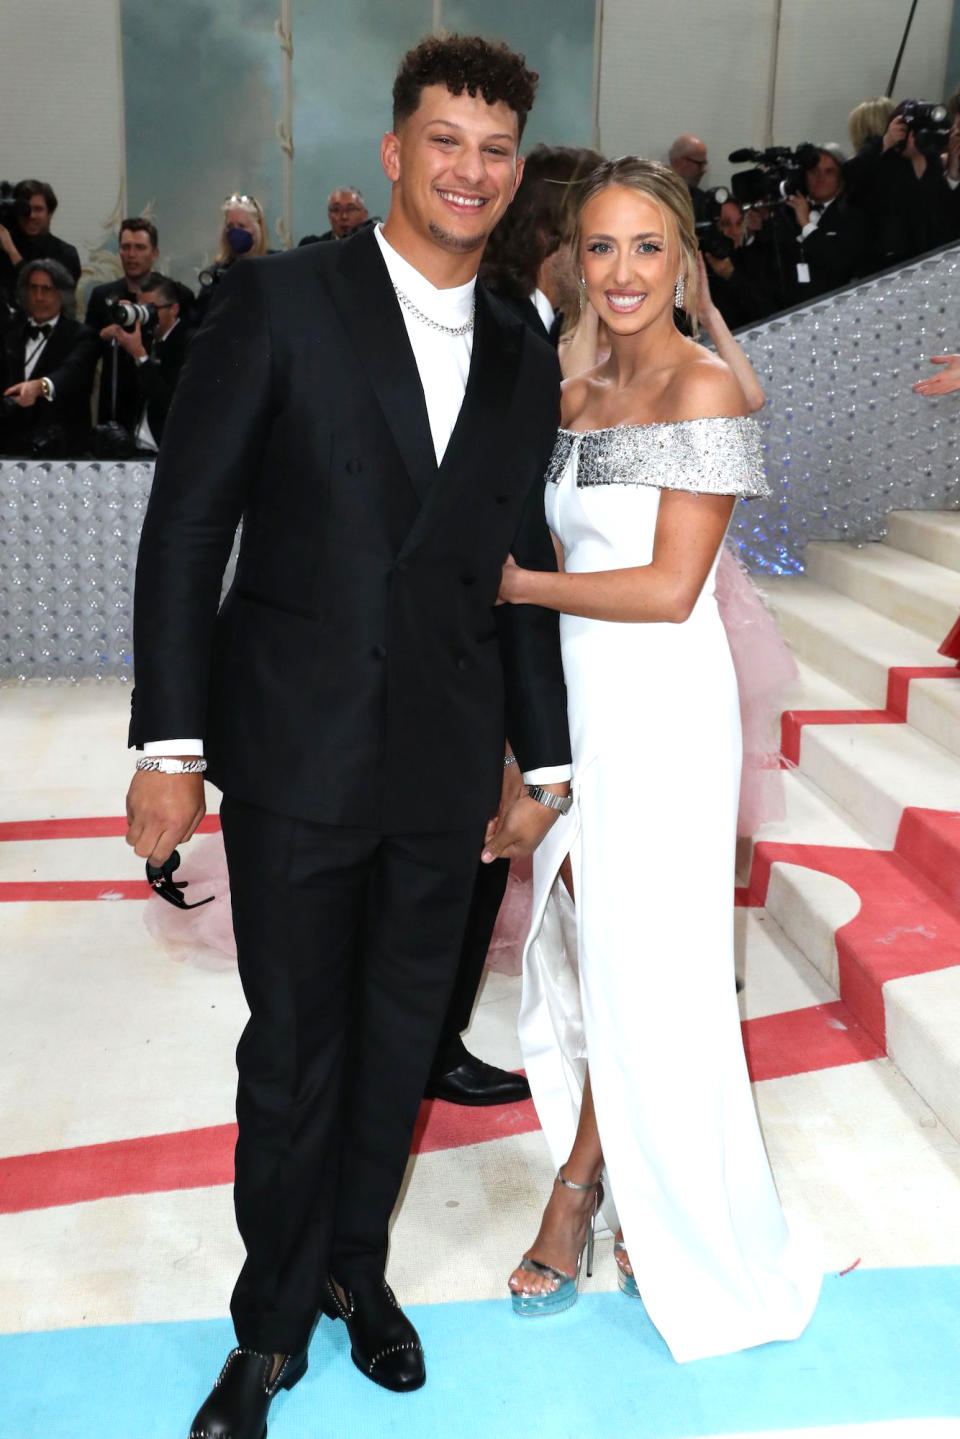 Patrick Mahomes and Wife Brittany Matthews Attend 1st Met Gala 3 Months